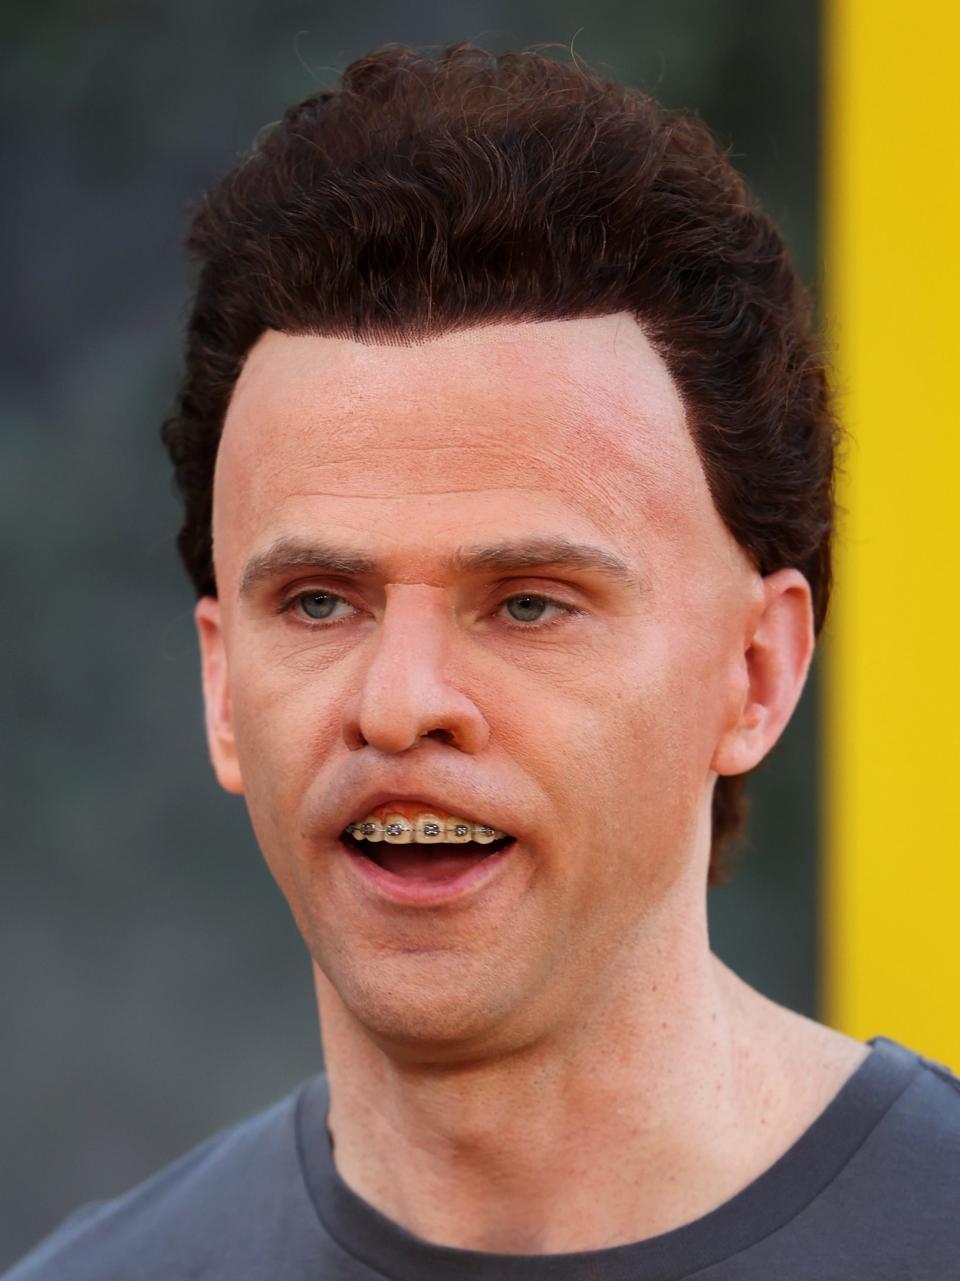 Mikey Day dressed as Butt-Head.